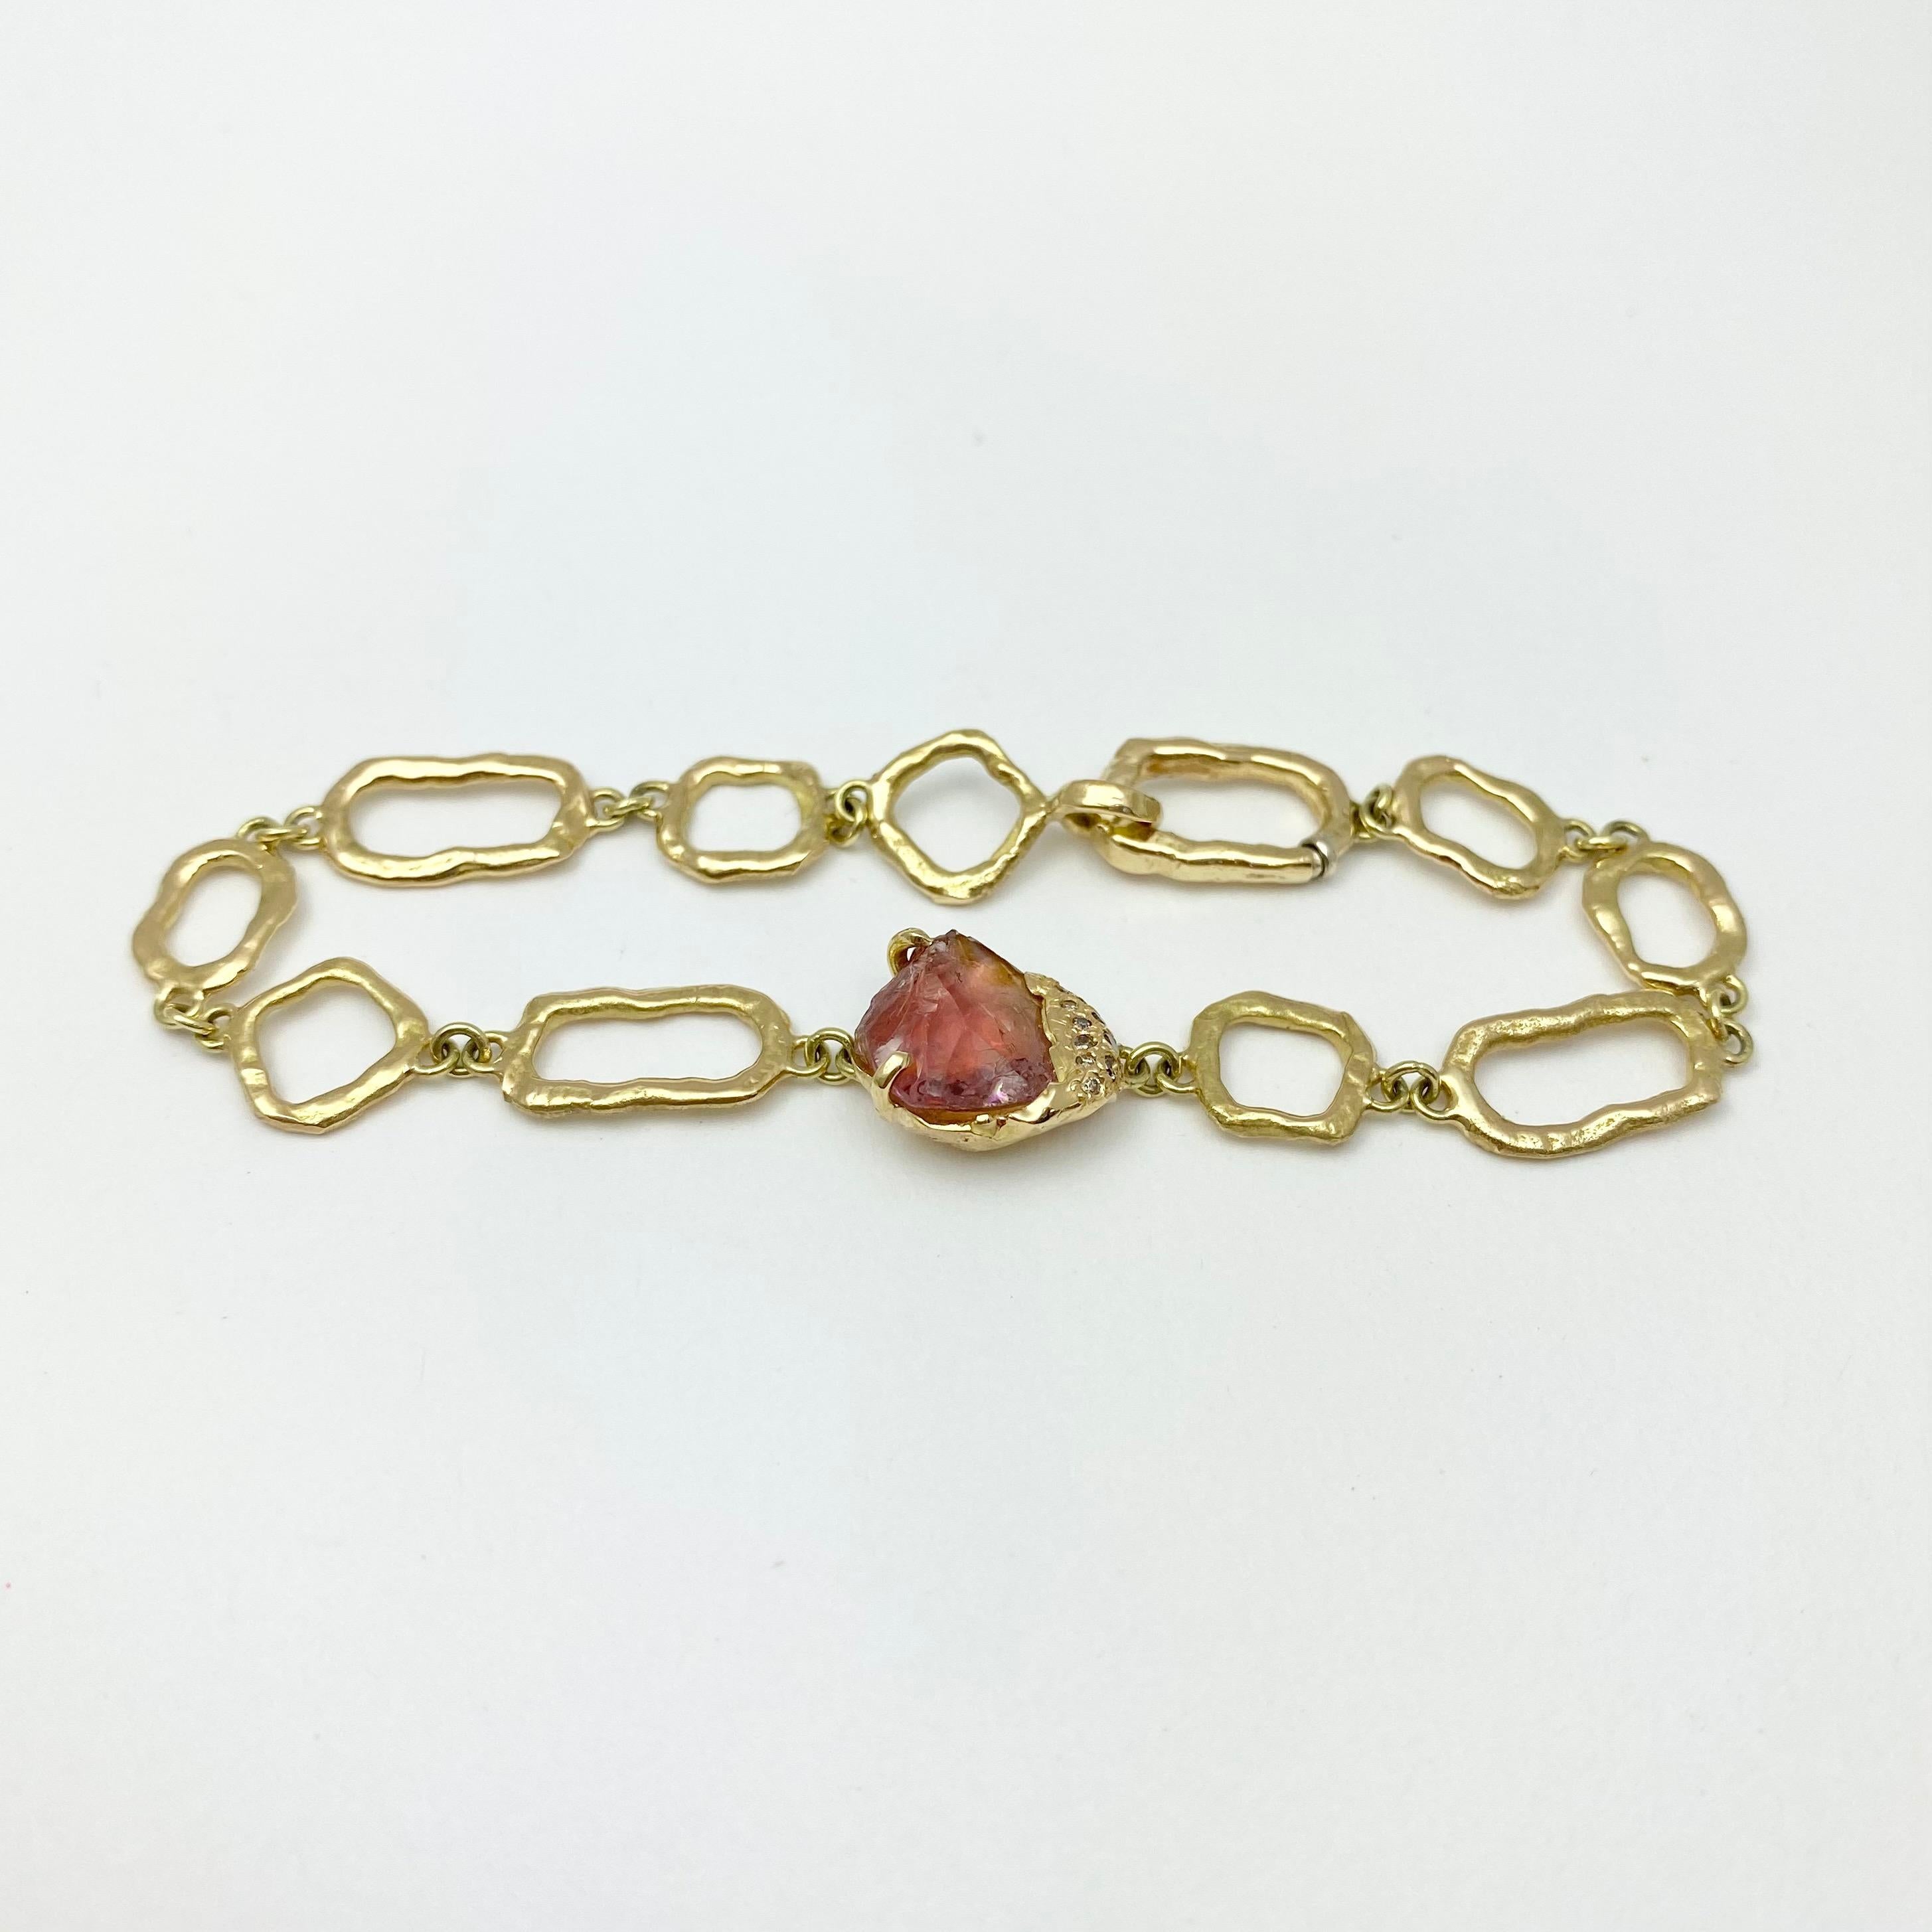 The Gladwell on Links bracelet is hand-crafted with 18-karat recycled yellow gold, and features one untreated, Tenda Cut, natural color pink tourmaline; and 11 round champagne accent diamonds. The Gladwell bracelet incorporates links of our own